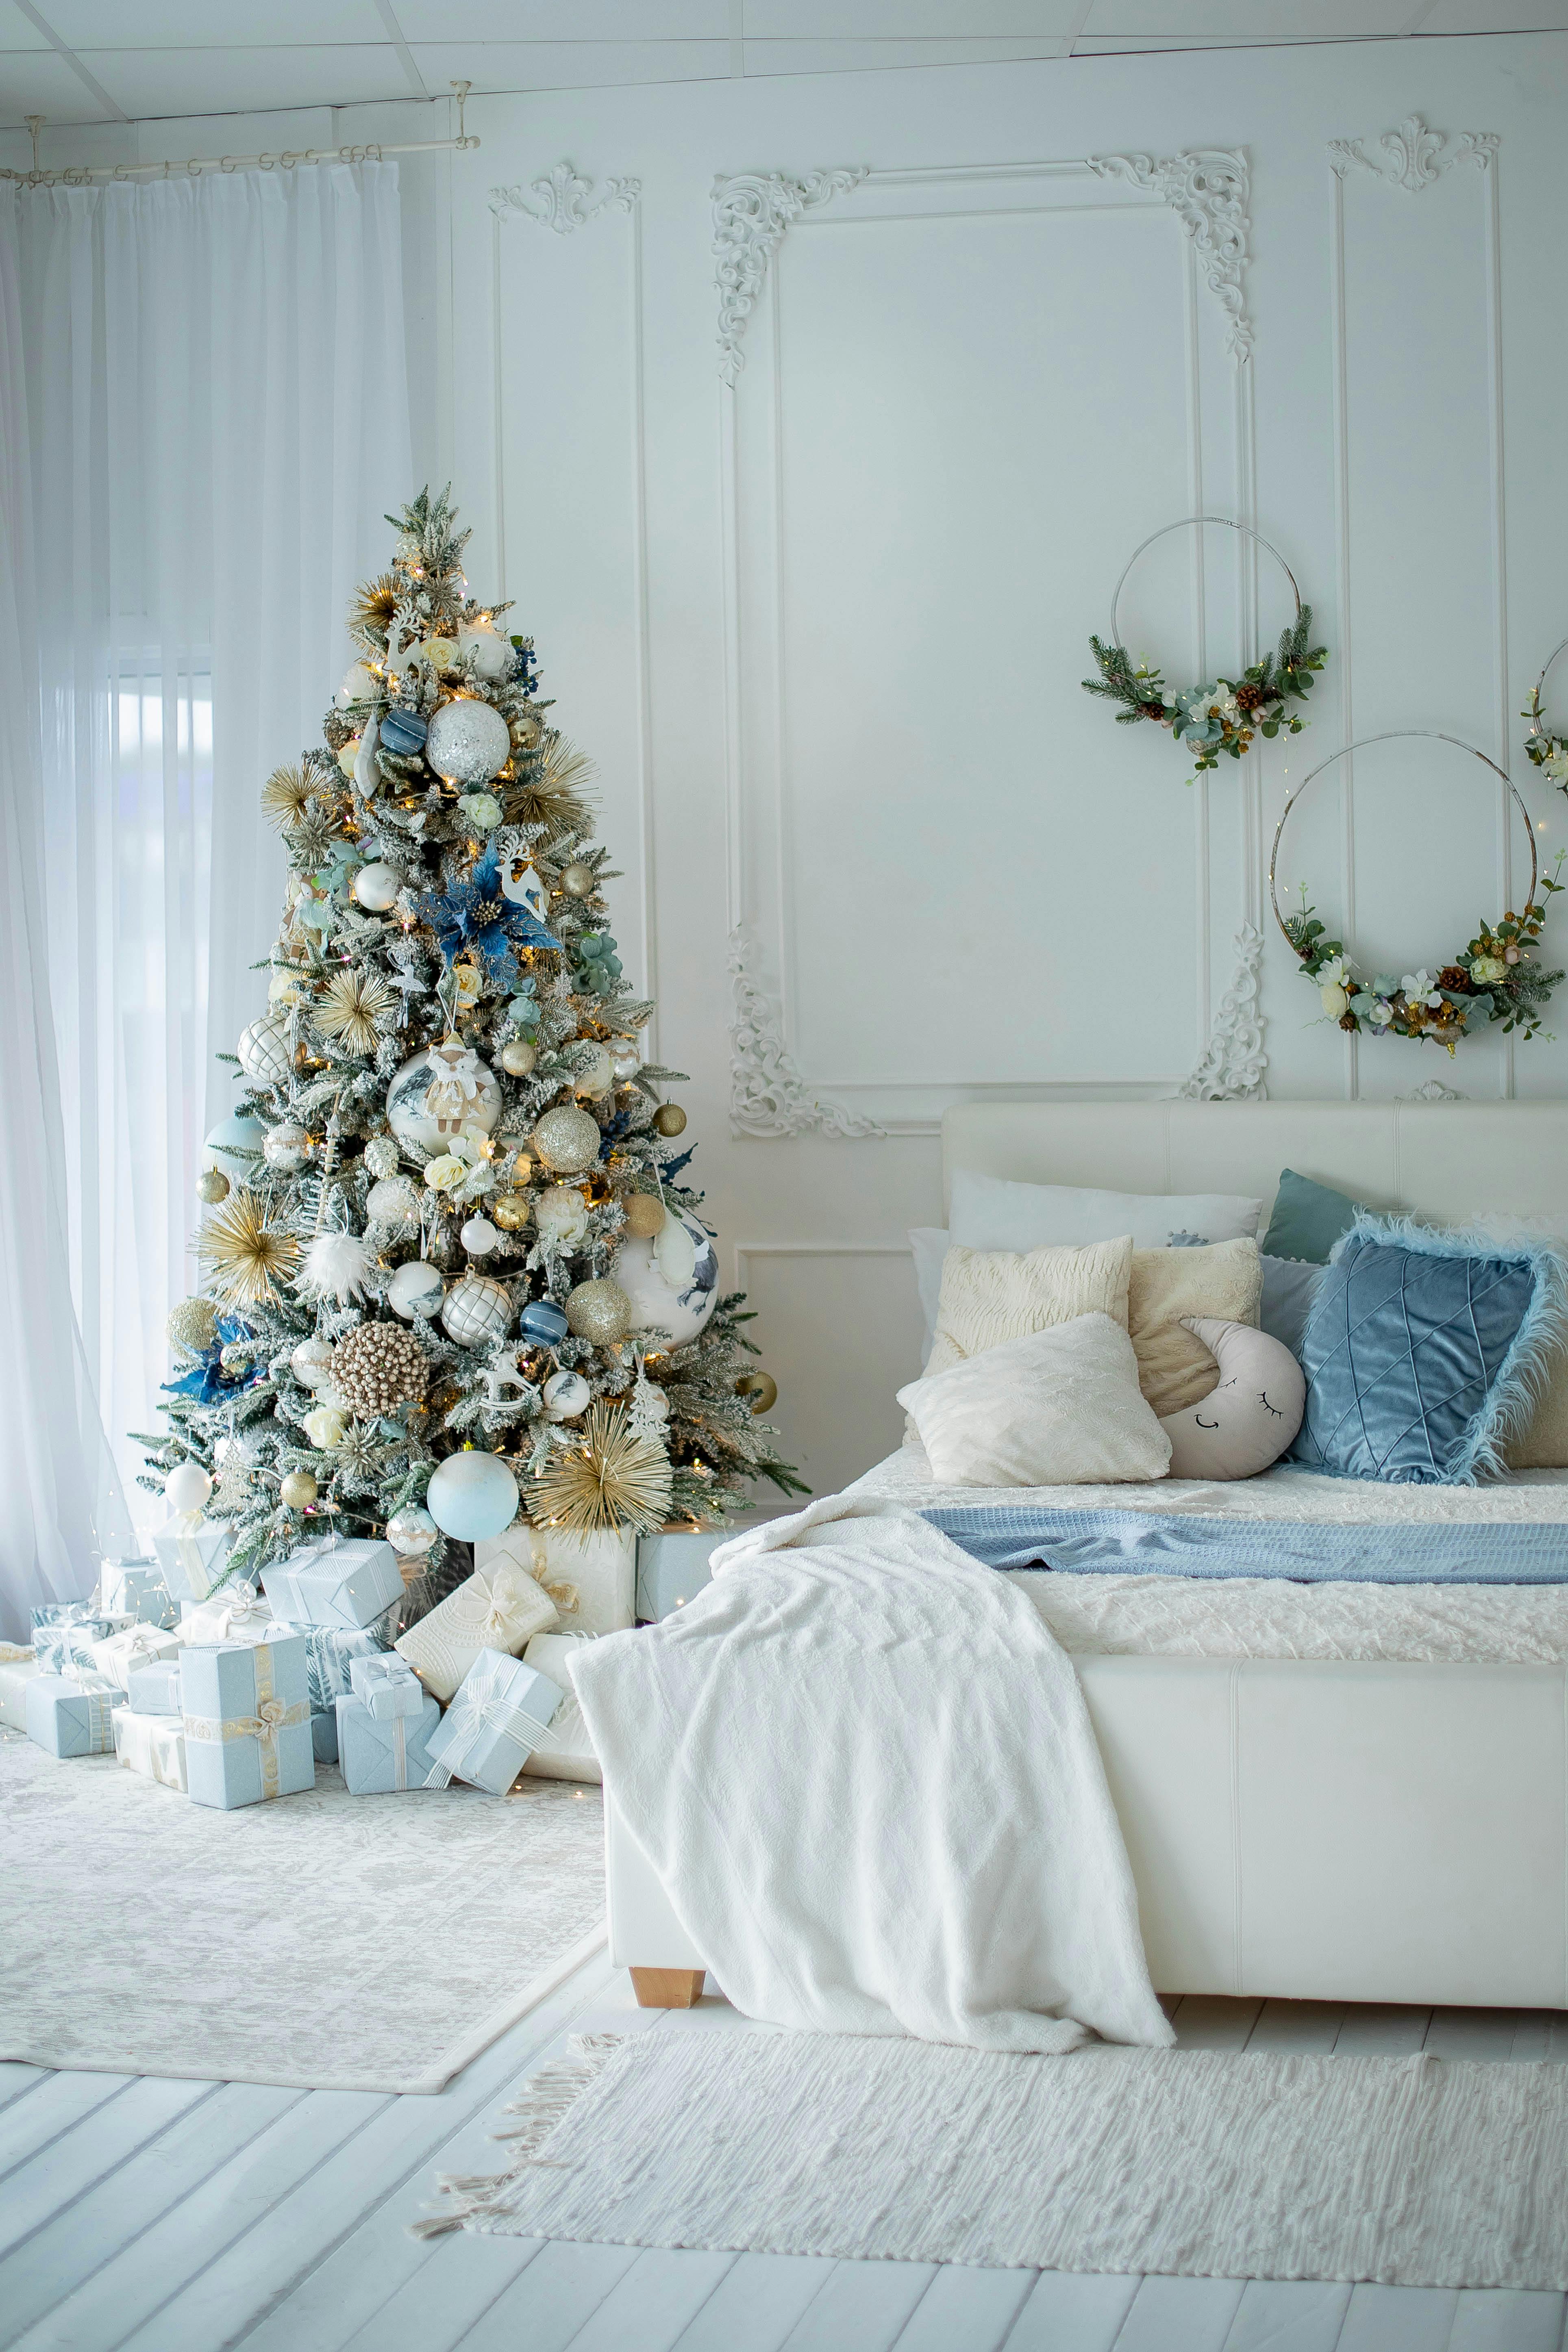 christmas tree and wall decorations in bedroom arranged in white and blue